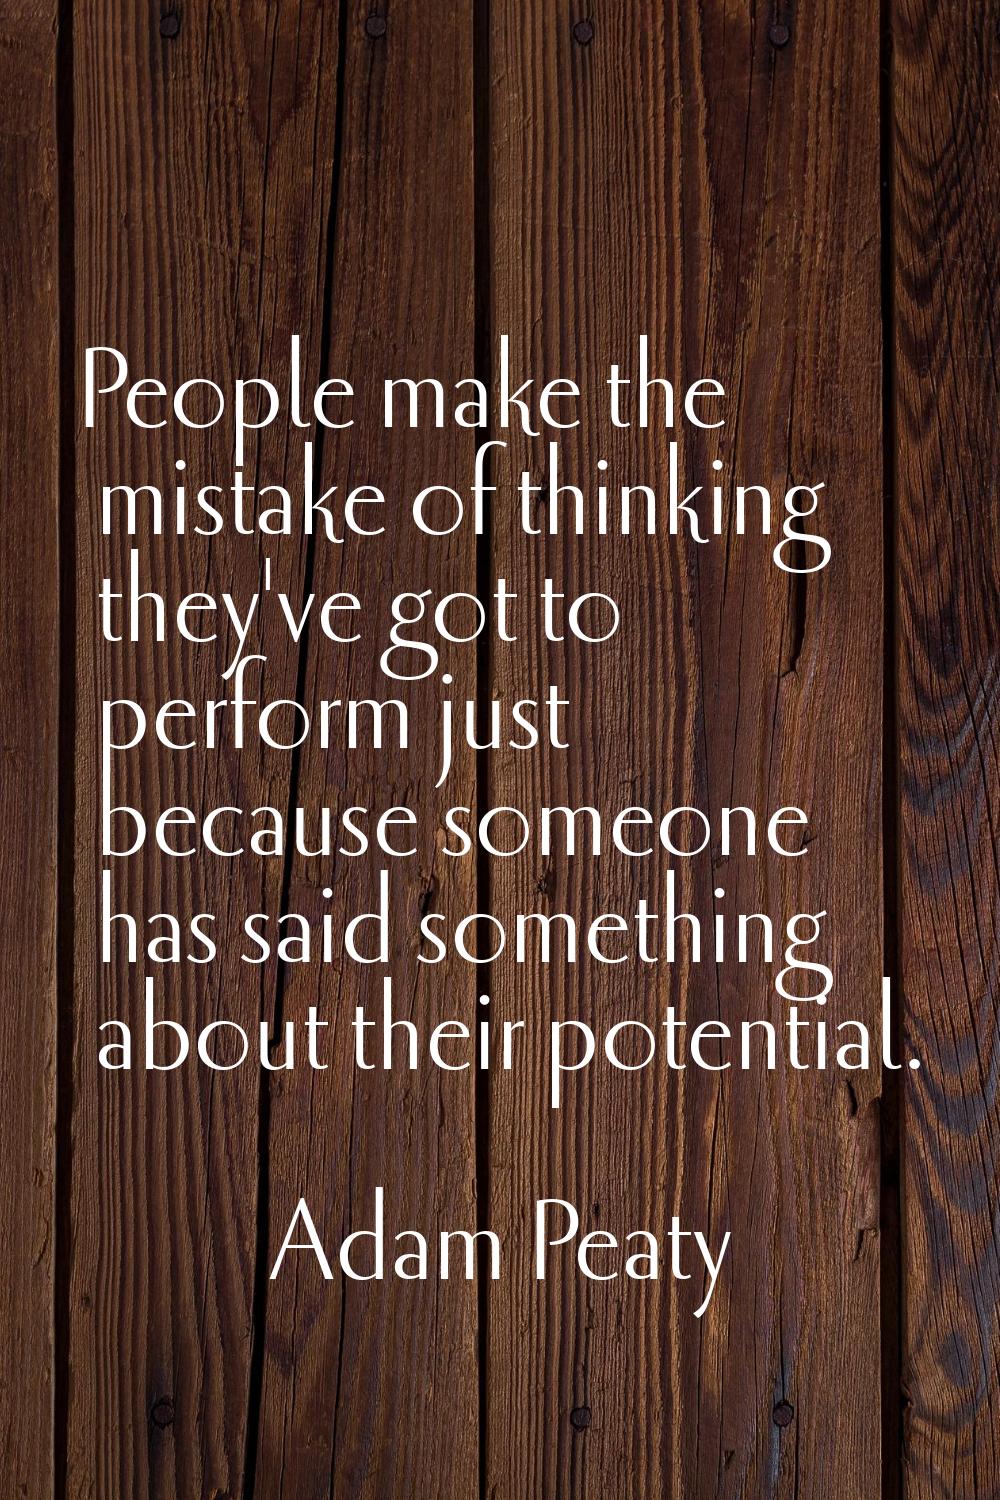 People make the mistake of thinking they've got to perform just because someone has said something 